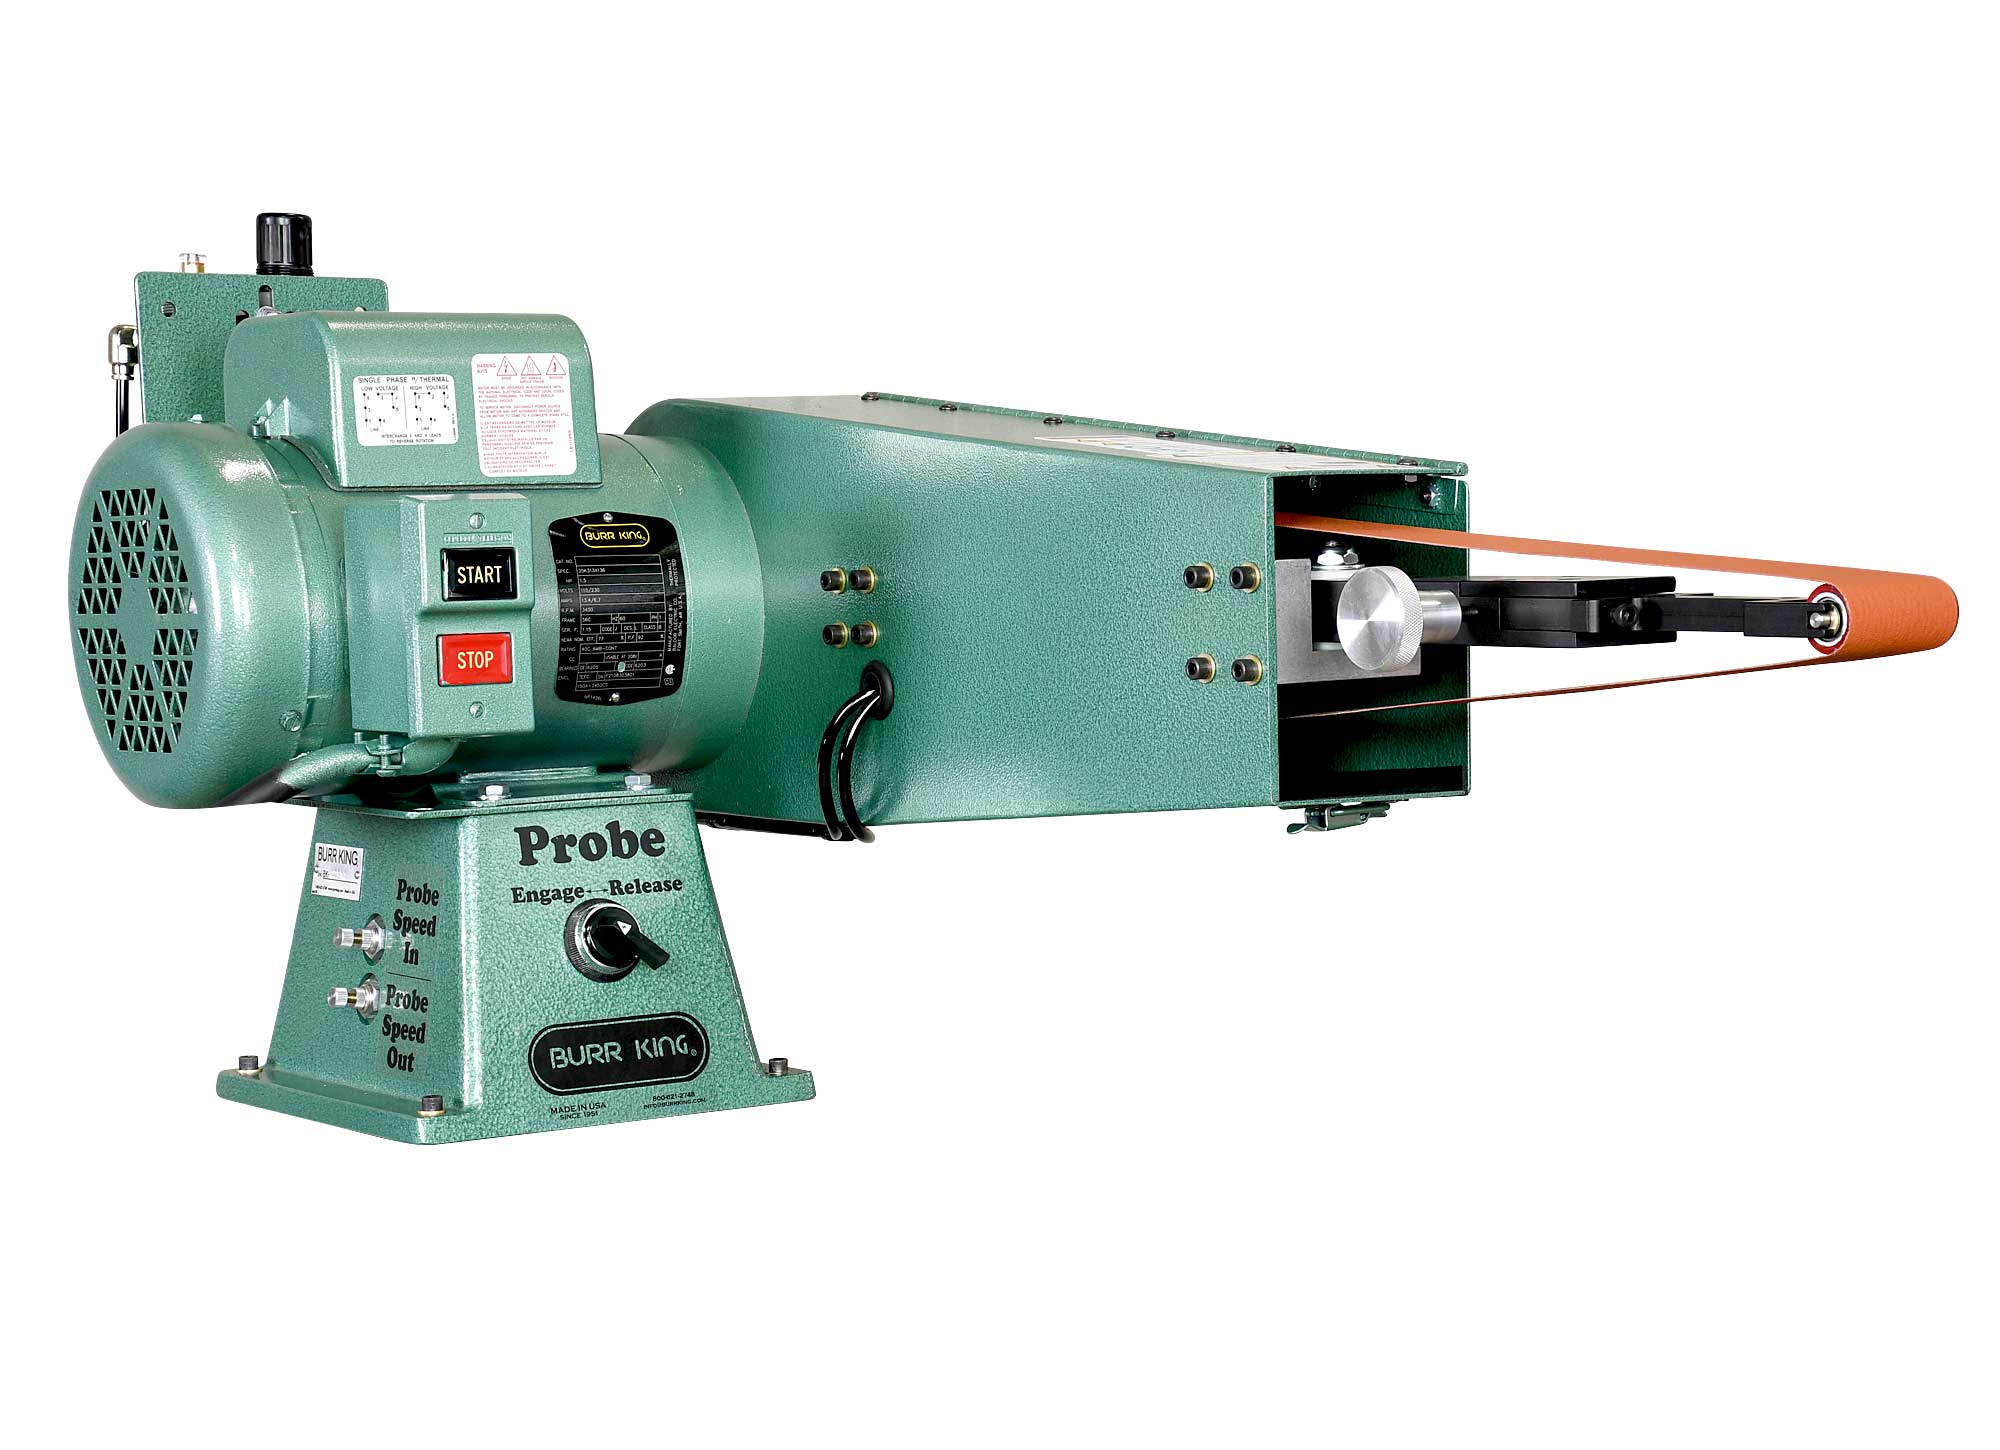 16300A -  Air tension fixed speed M720 probe grinder